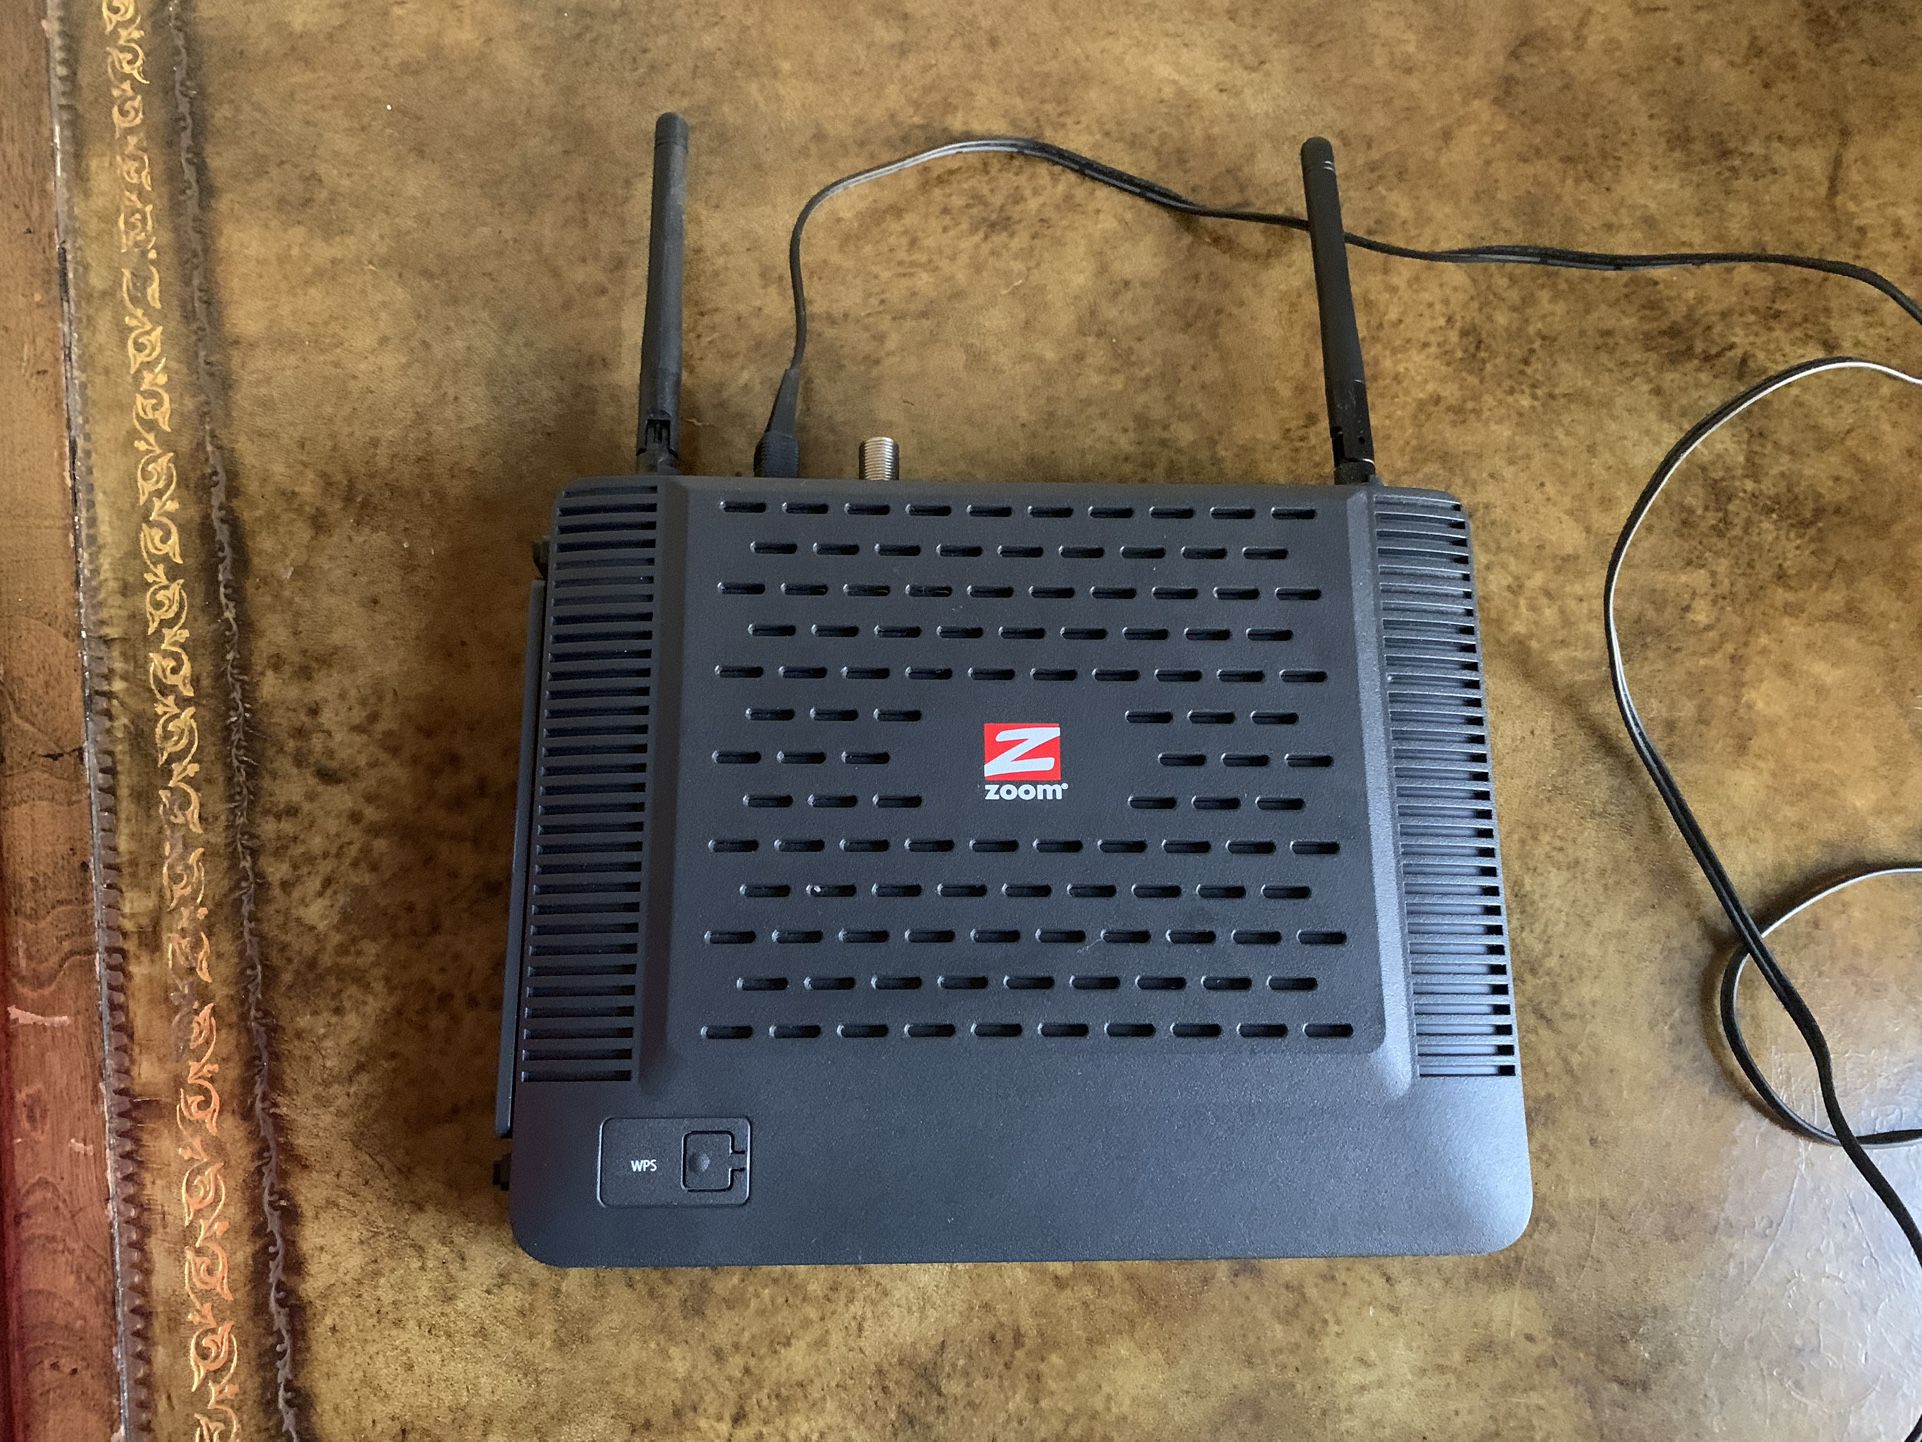 Modem + Wireless-N Router ZOOM 5352  DOCSIS 3.0